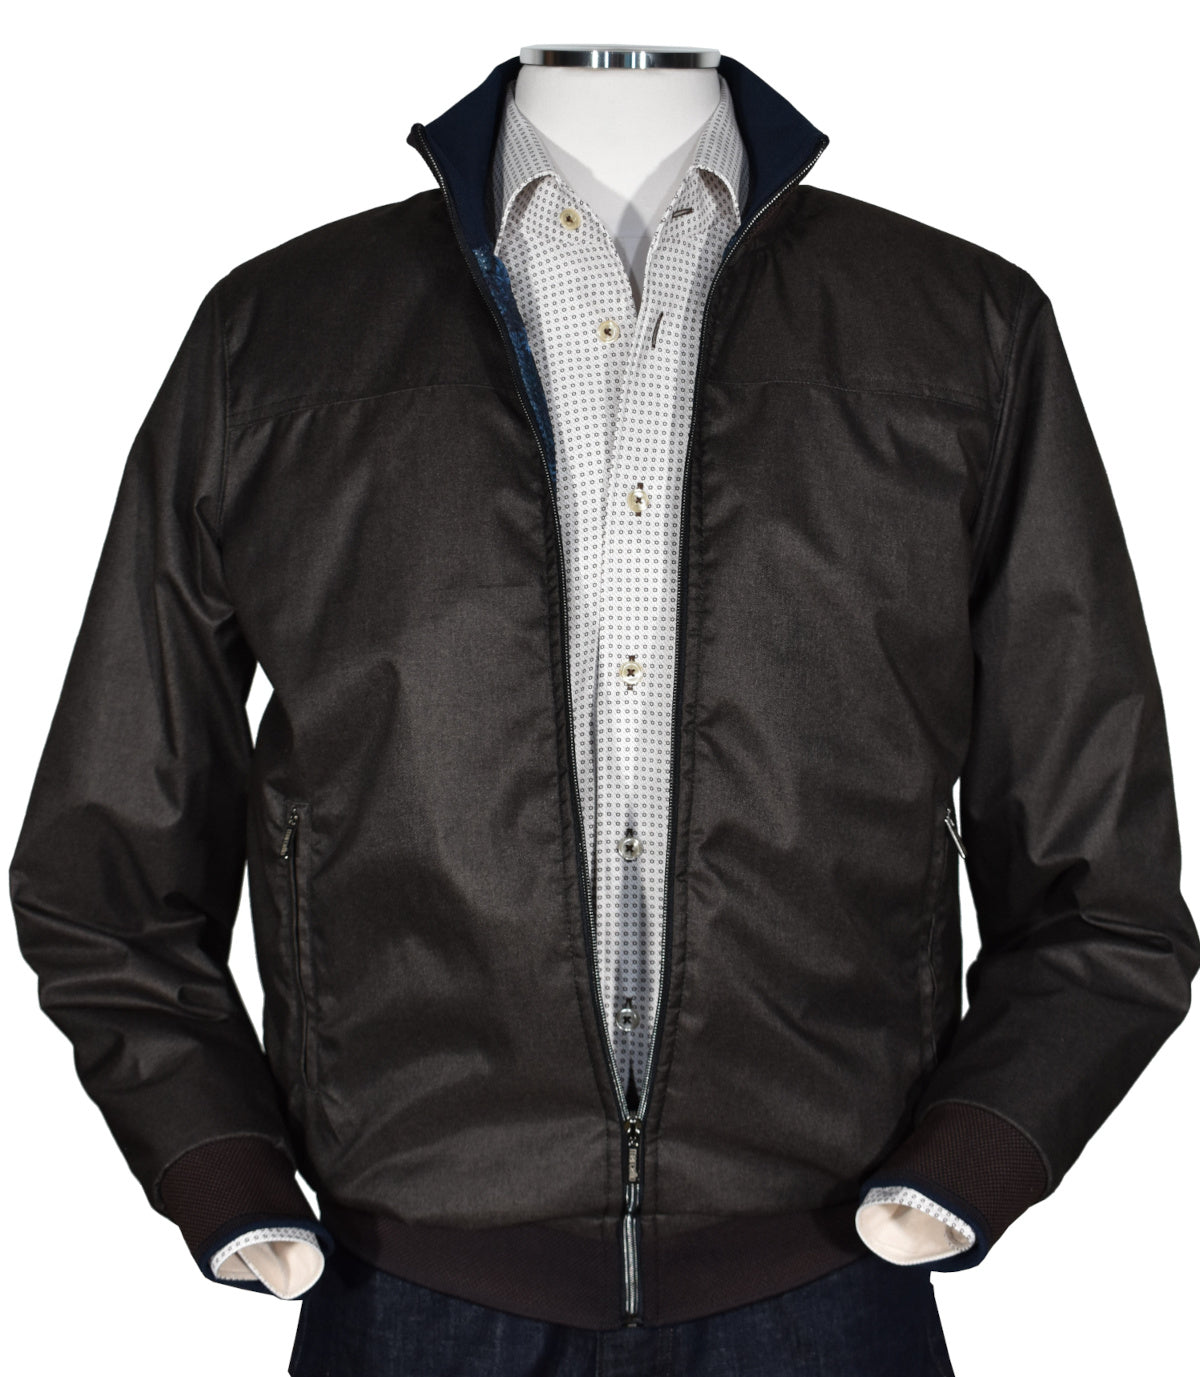 Elevate your look with the luxurious J413 Mocha Microfiber Bomber. Featuring a style and sophistication rarely found, this regal bomber is made from a lightweight microfiber fabric with a rich melange look, plus fashion-forward neck band, cuffs and waist band enhancements and a cool royal blue printed lining. Designed to fit a slim to medium build, this bomber is sure to make you stand out in a crowd.  Classic fit and classic banded cuffs and waist band.